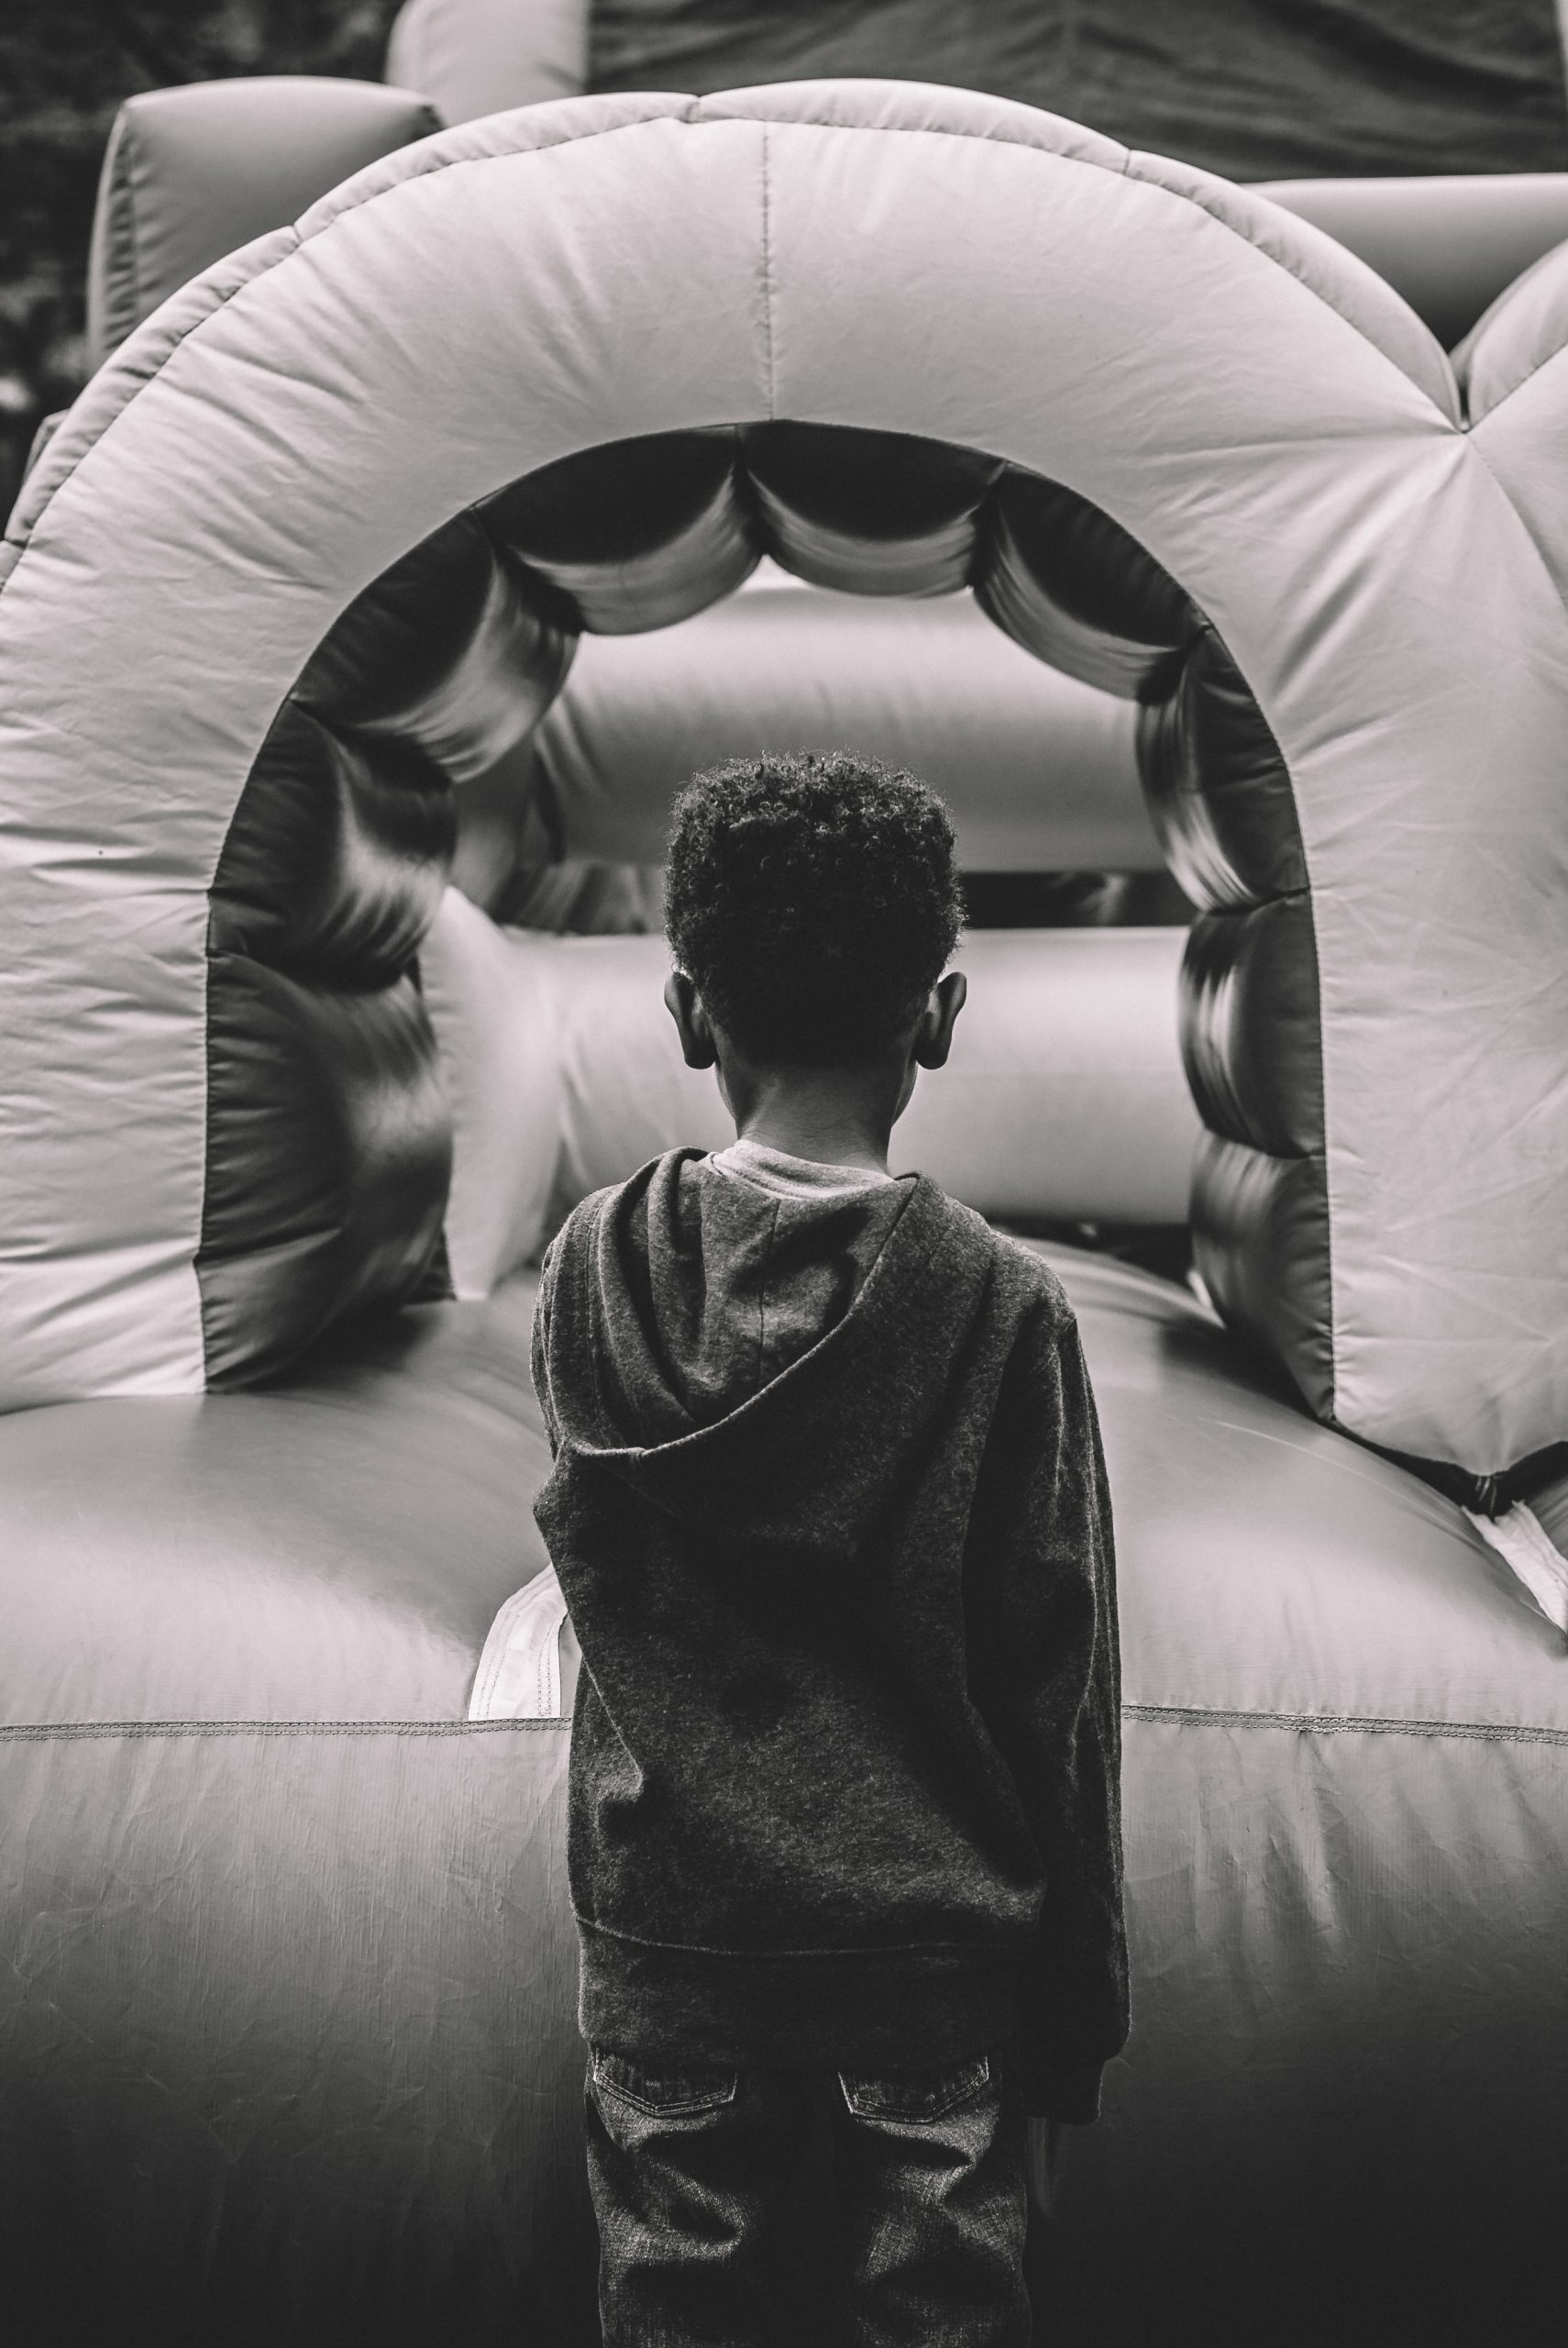 Bounce house rental in Raleigh